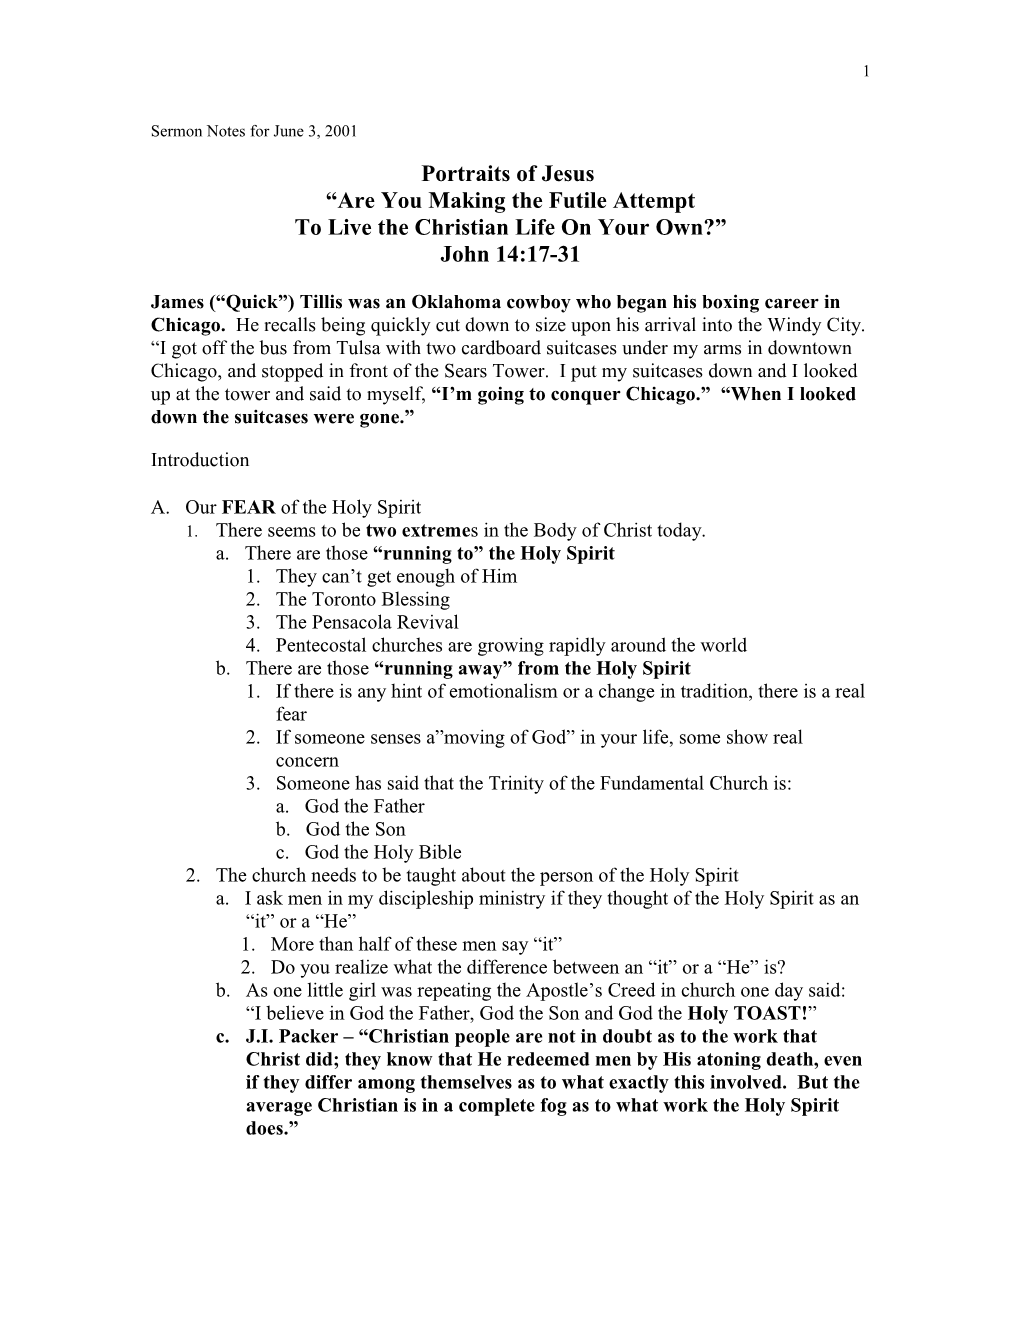 Sermon Notes for June 3, 2001